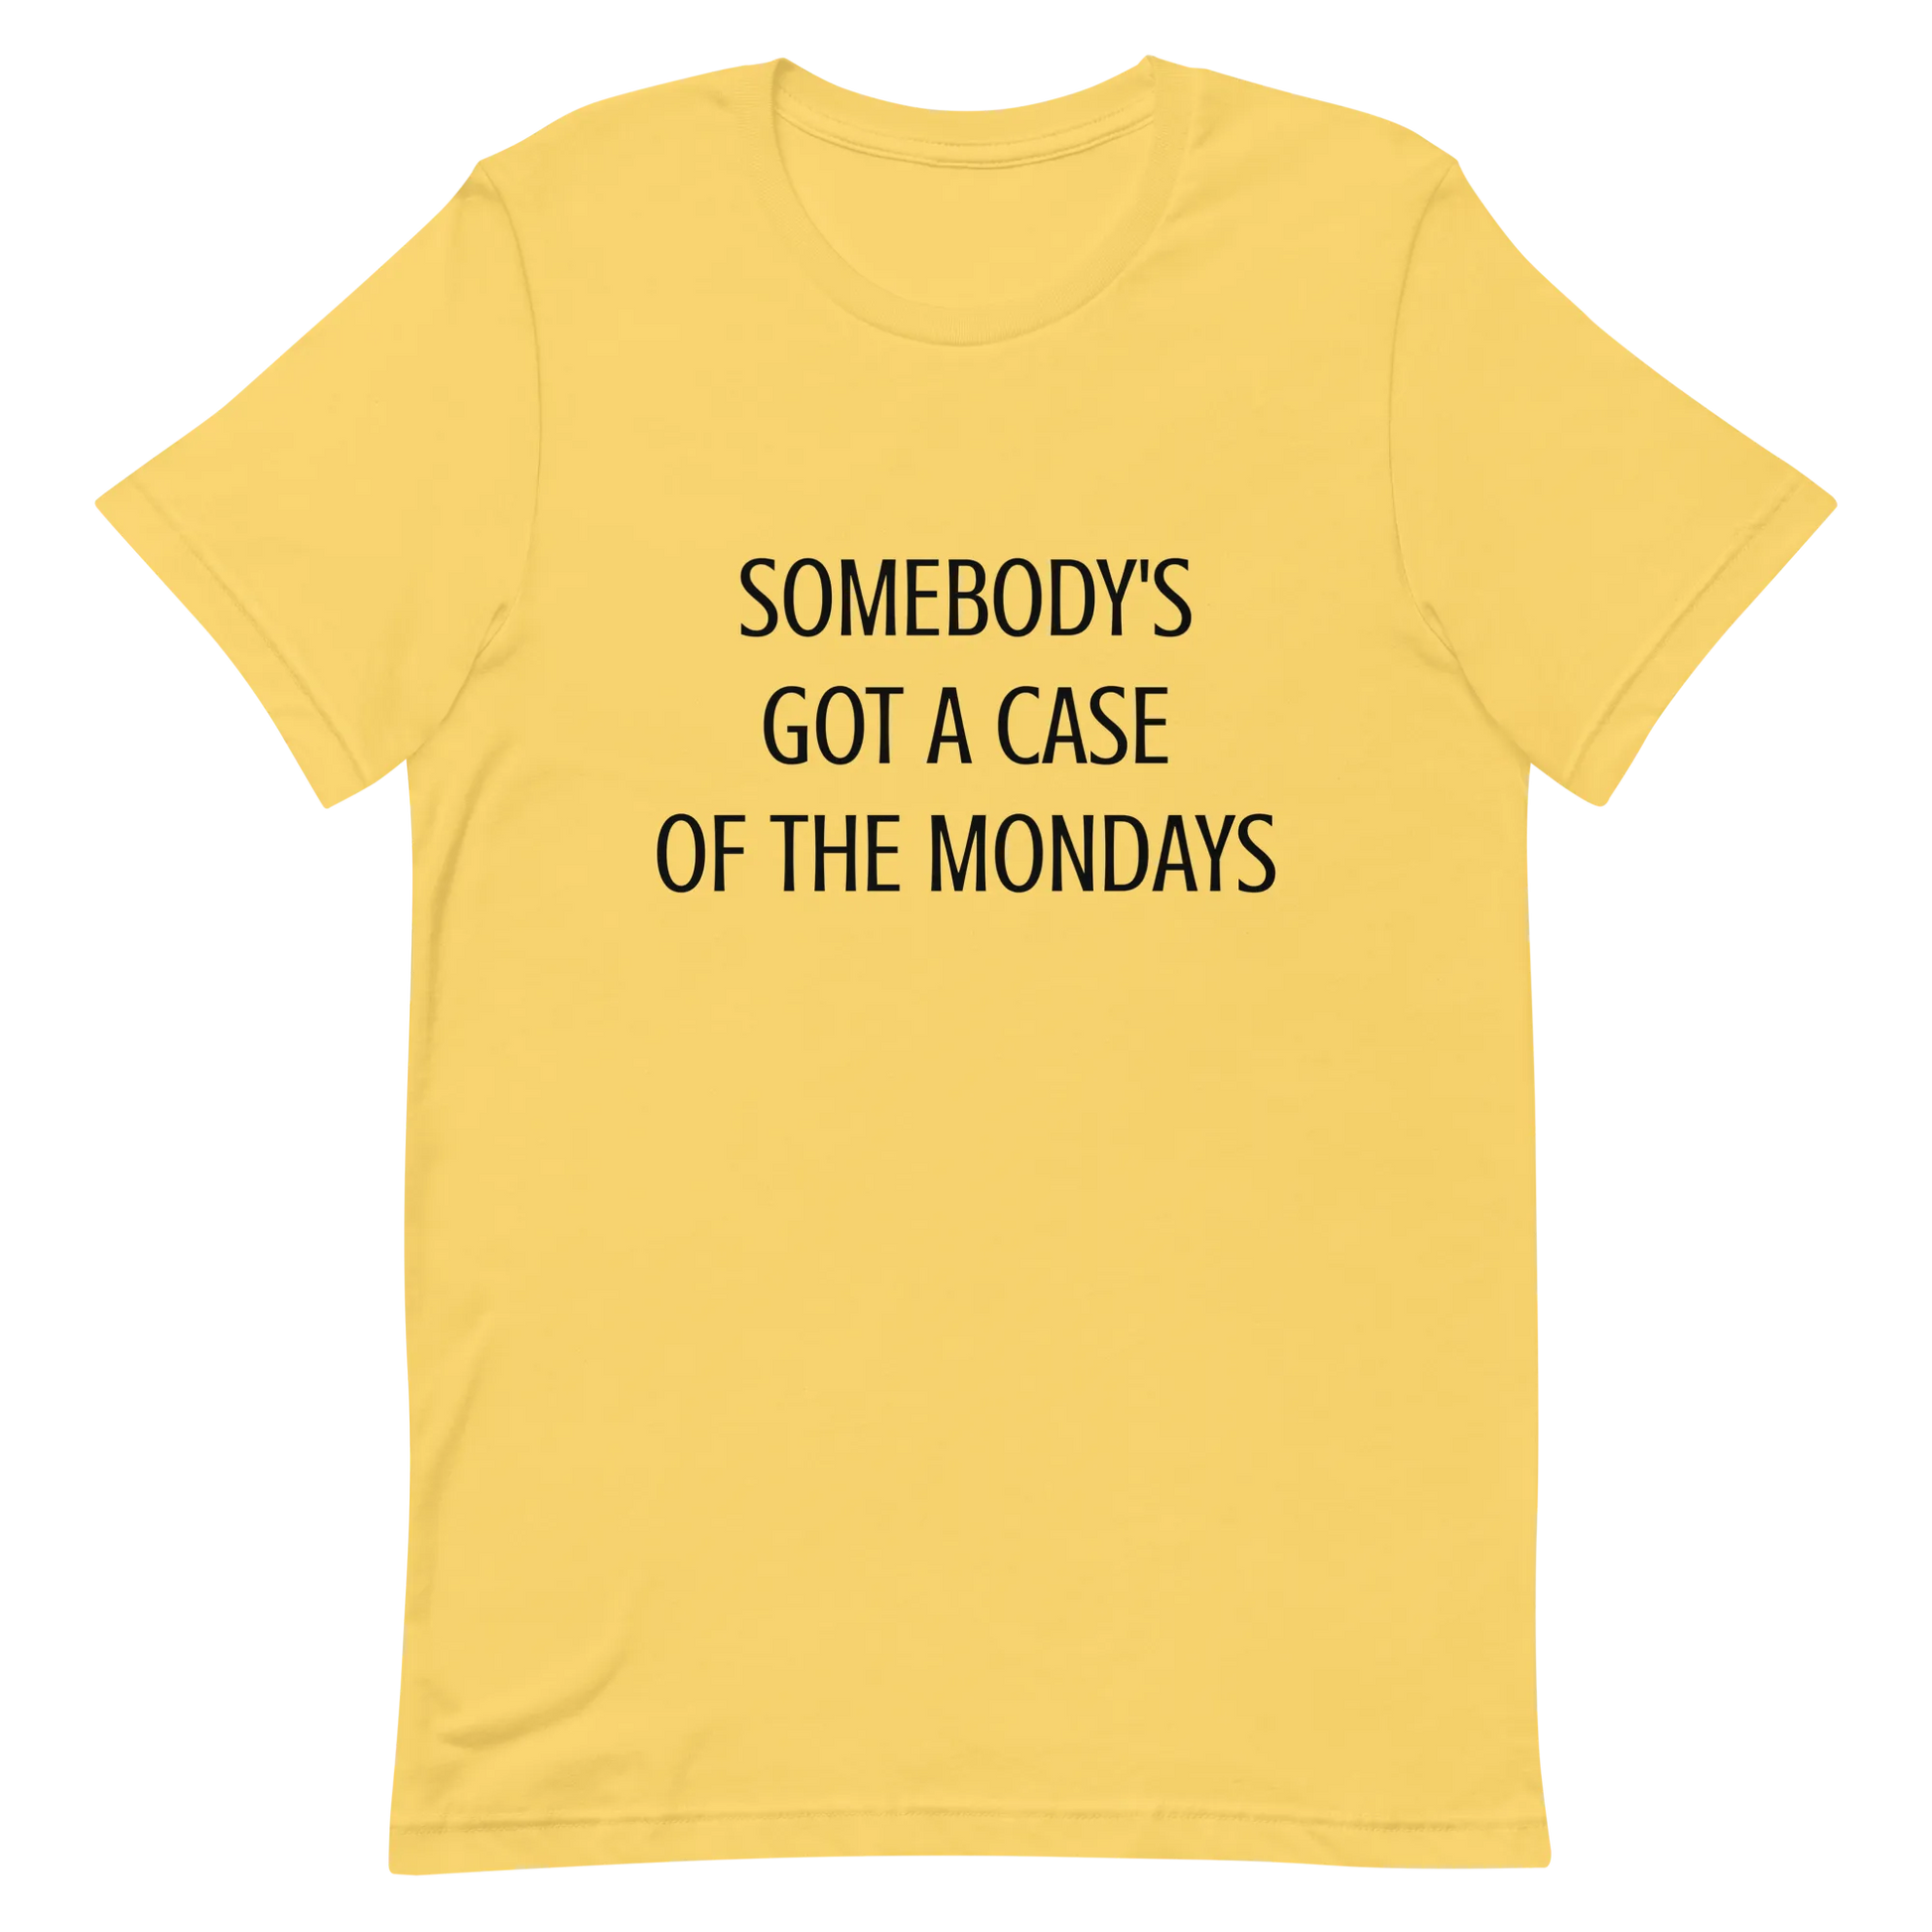 Somebody's Got a Case of the Mondays Tee in Yellow flatlay